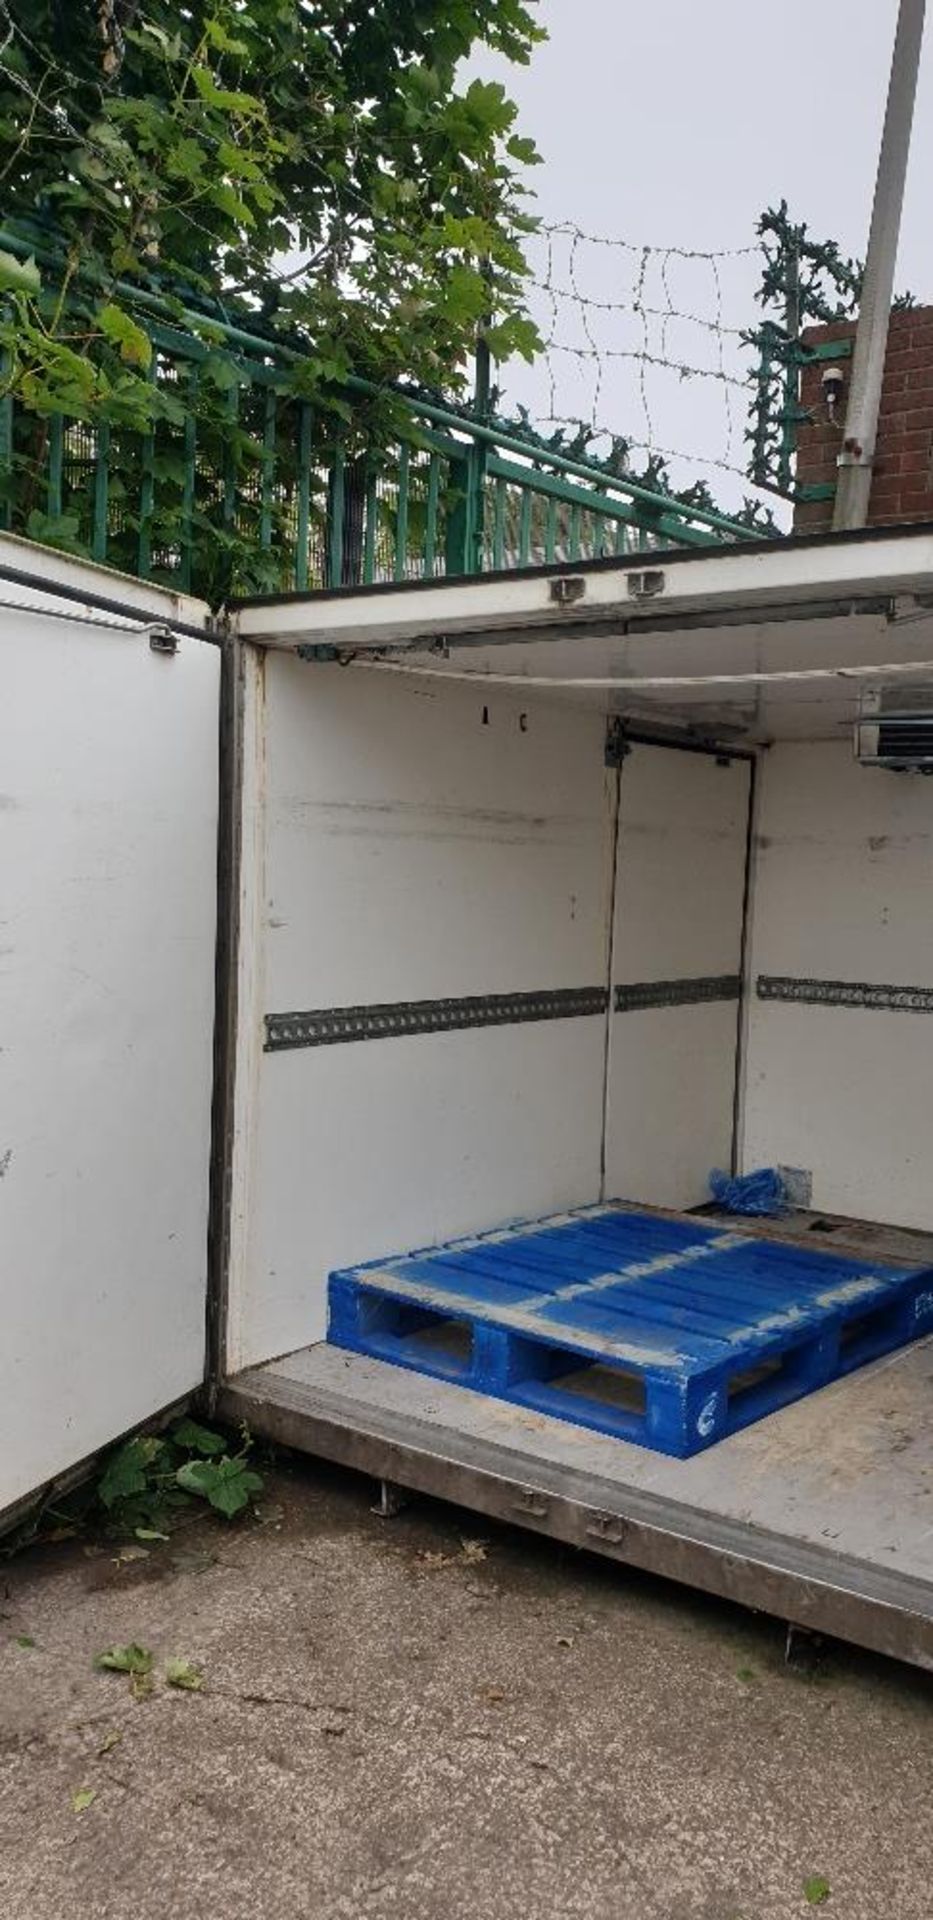 Former van body used as cold store, internal dimensions: approx. 2.4 x 1.8 x 1.6m high - Image 3 of 3